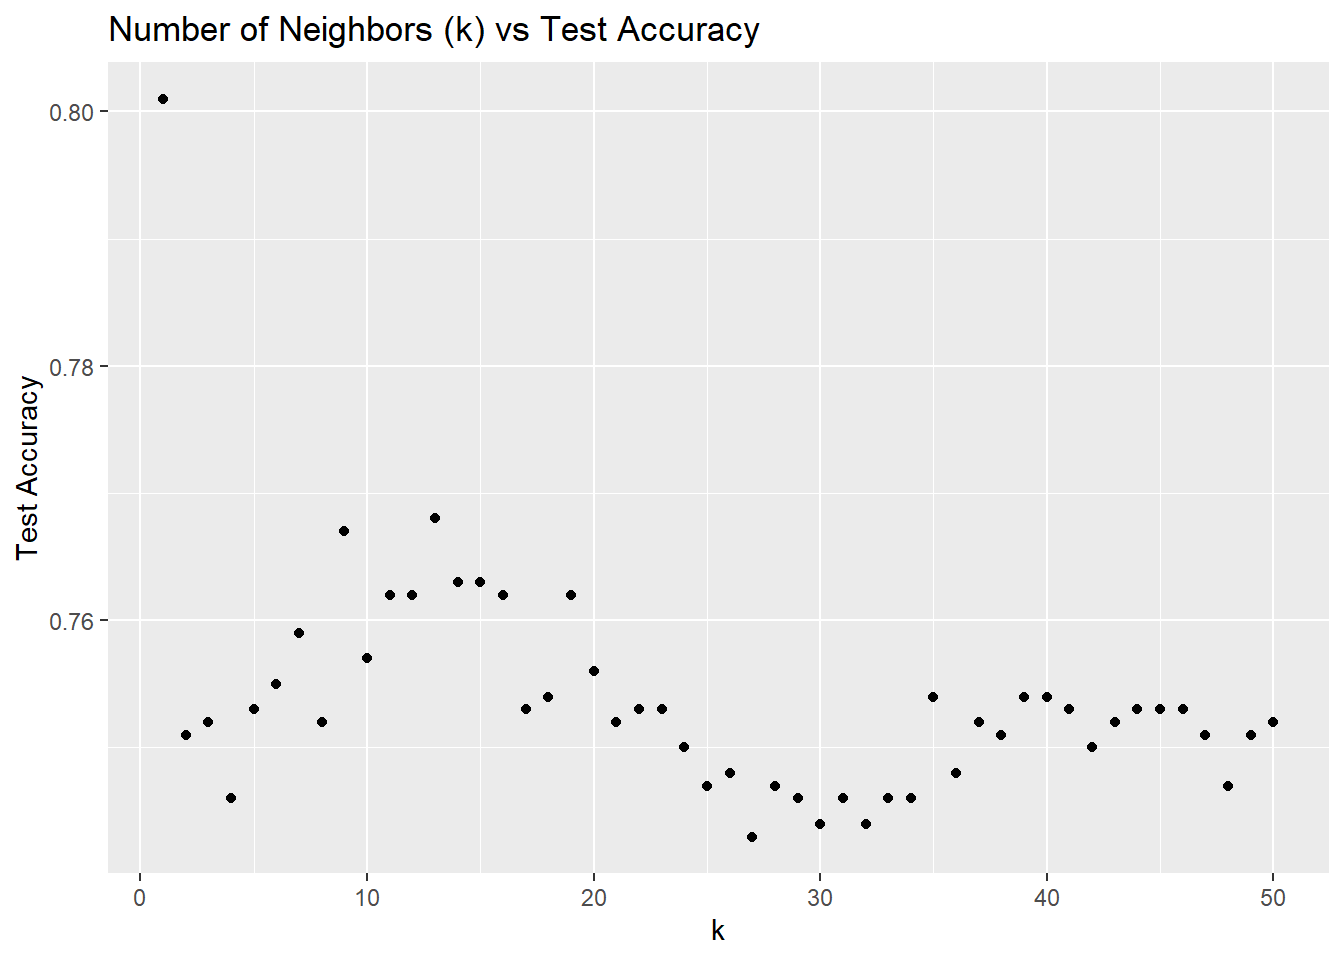 Testing various values of k with the k-nearest neighbors algorithm, and comparing accuracies.